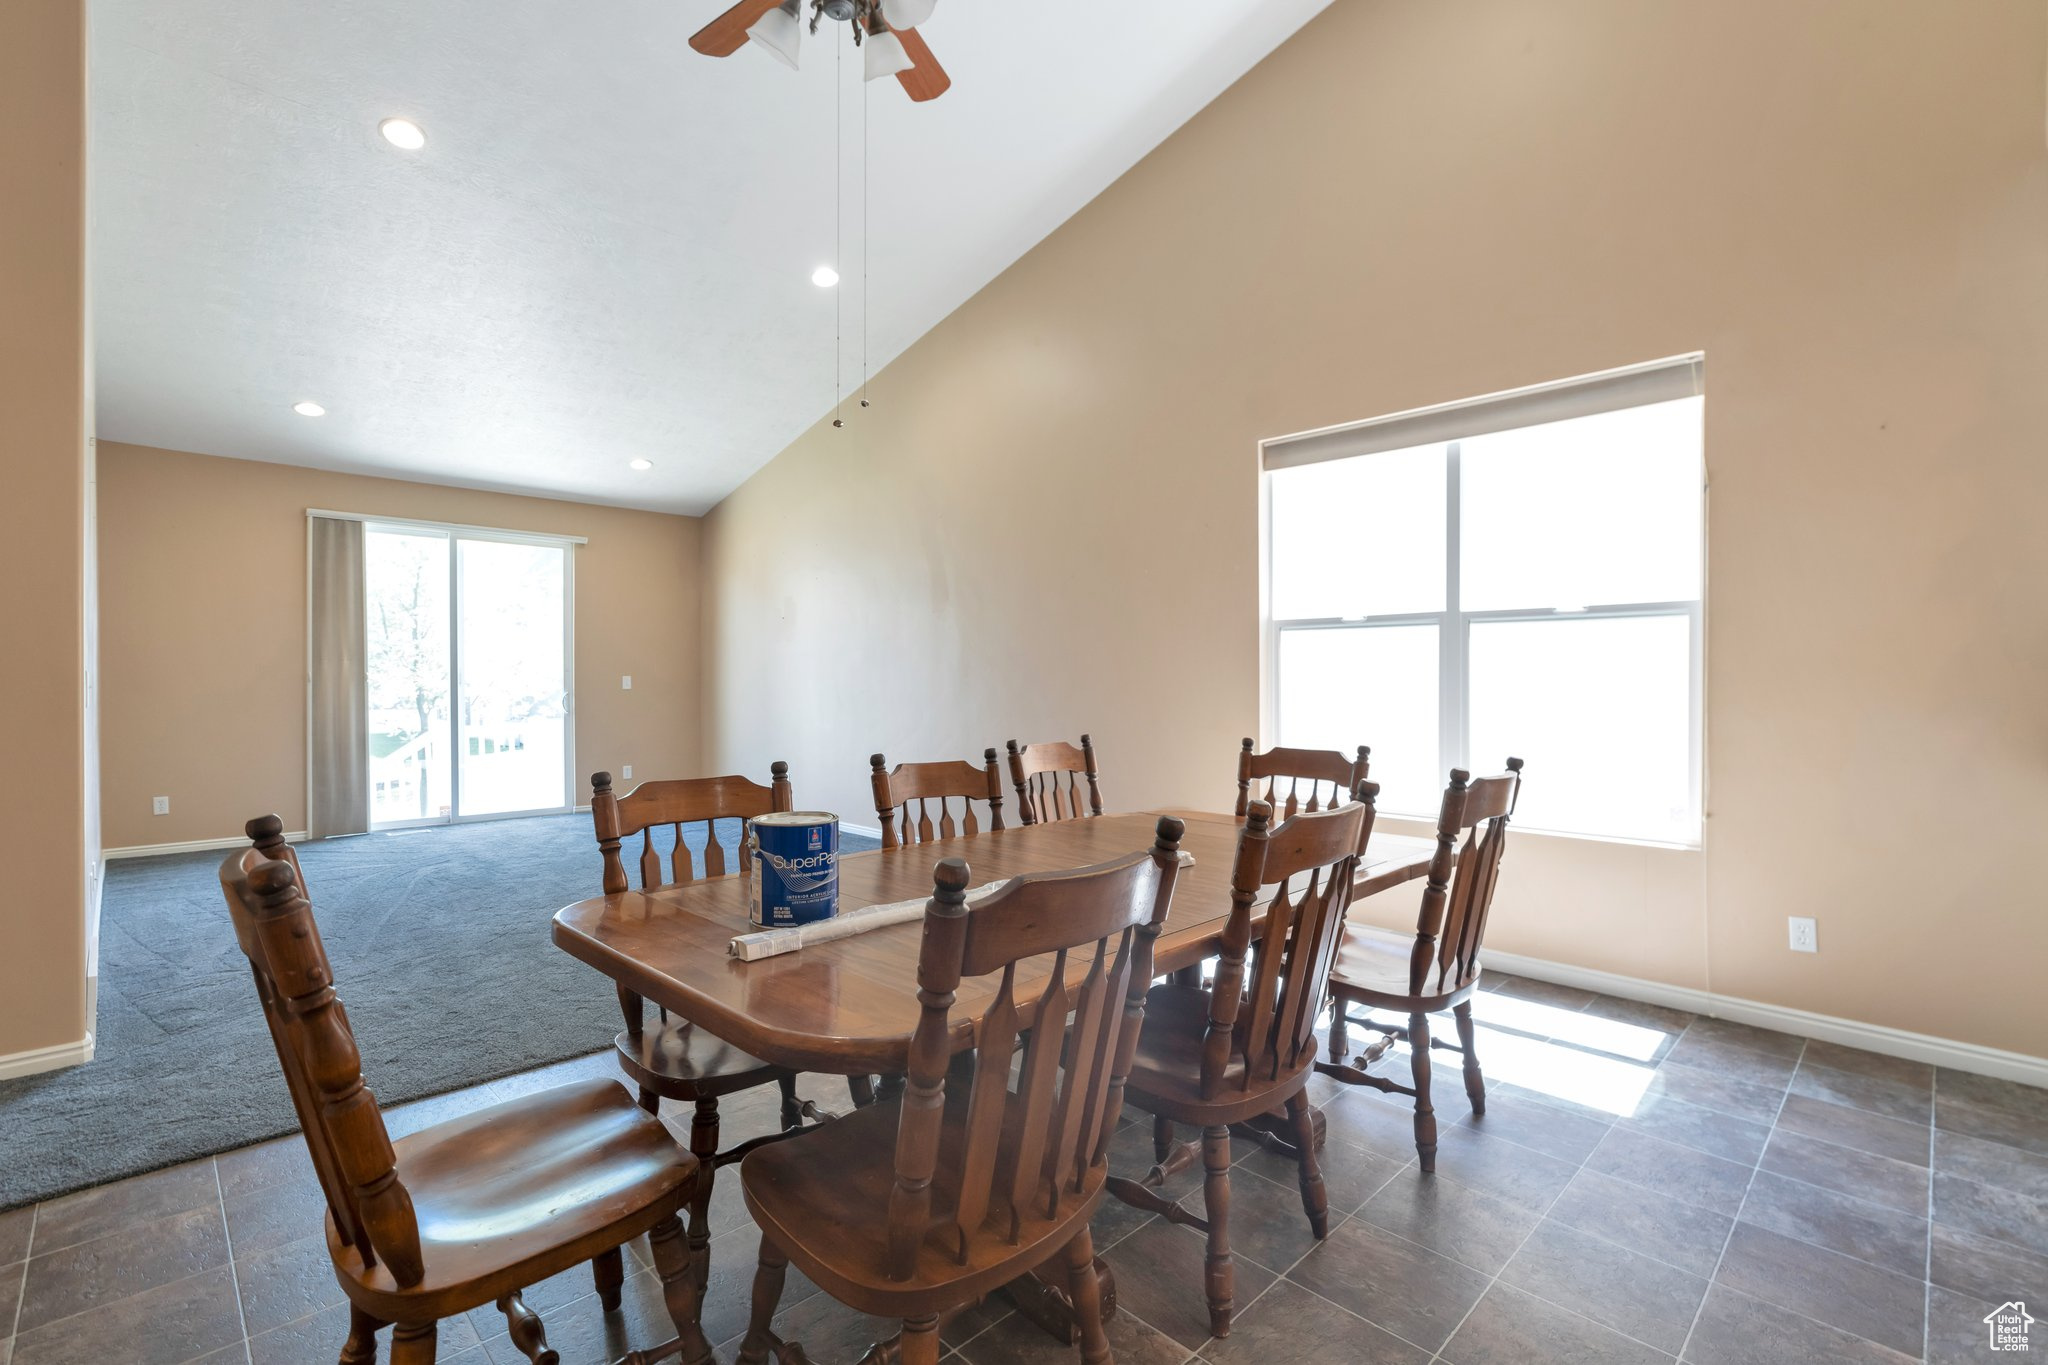 Dining area with high vaulted ceiling and great room